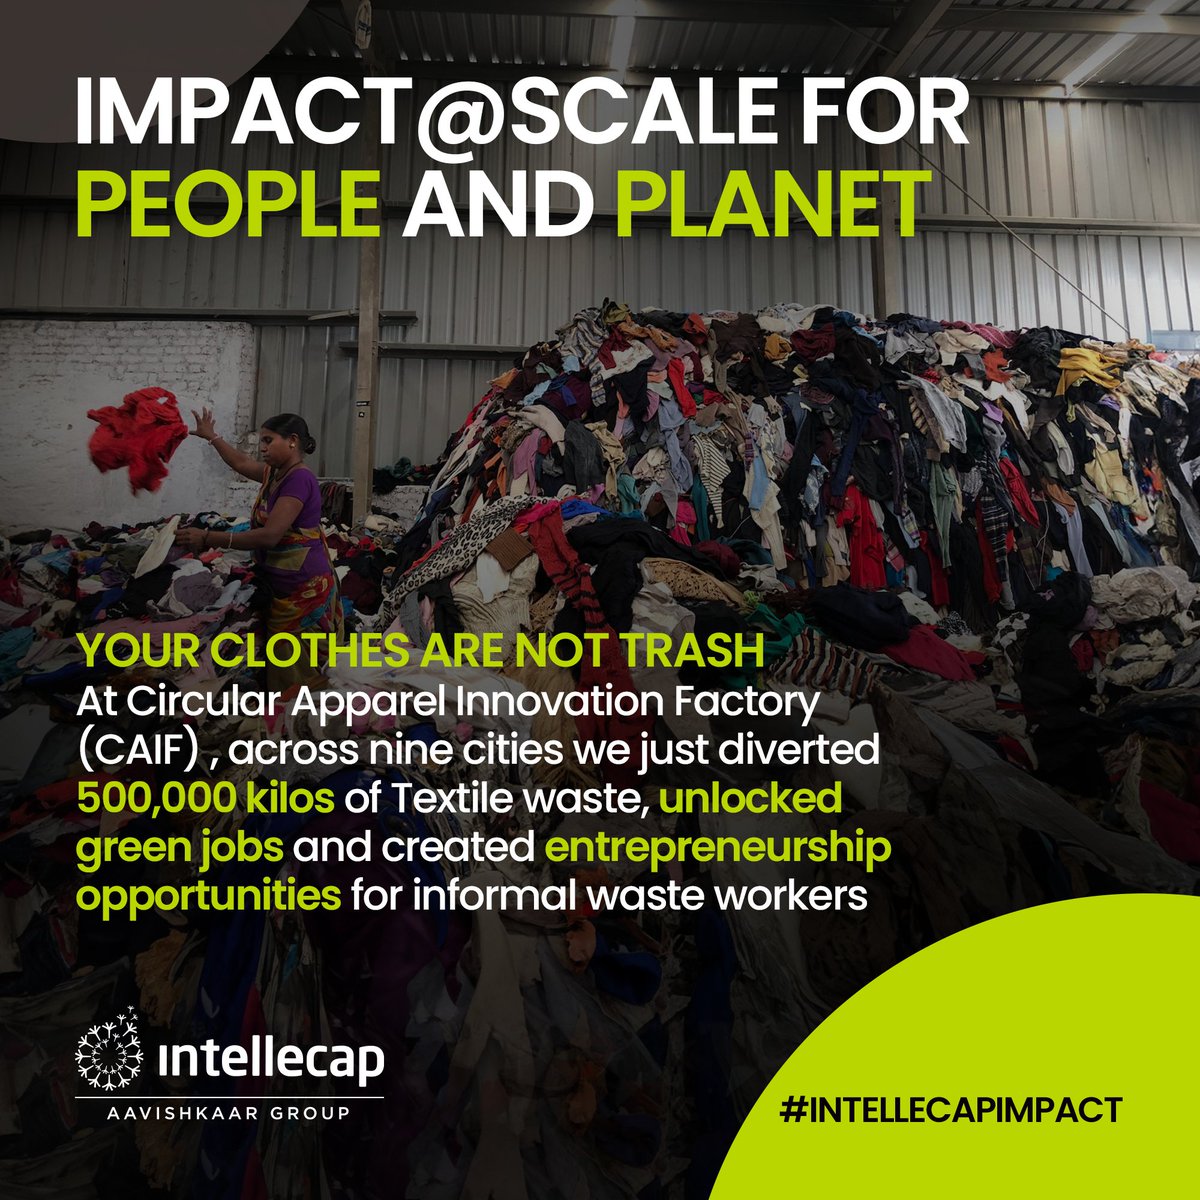 At Intellecap we are creating Impact@Scale for the People and the Planet. @ApparelCircular we are moving the needle on with our work around textile waste, unlocking green jobs & creating entrepreneurship for informal waste workers. Read more - httpow.ly/p8M050RnGgup